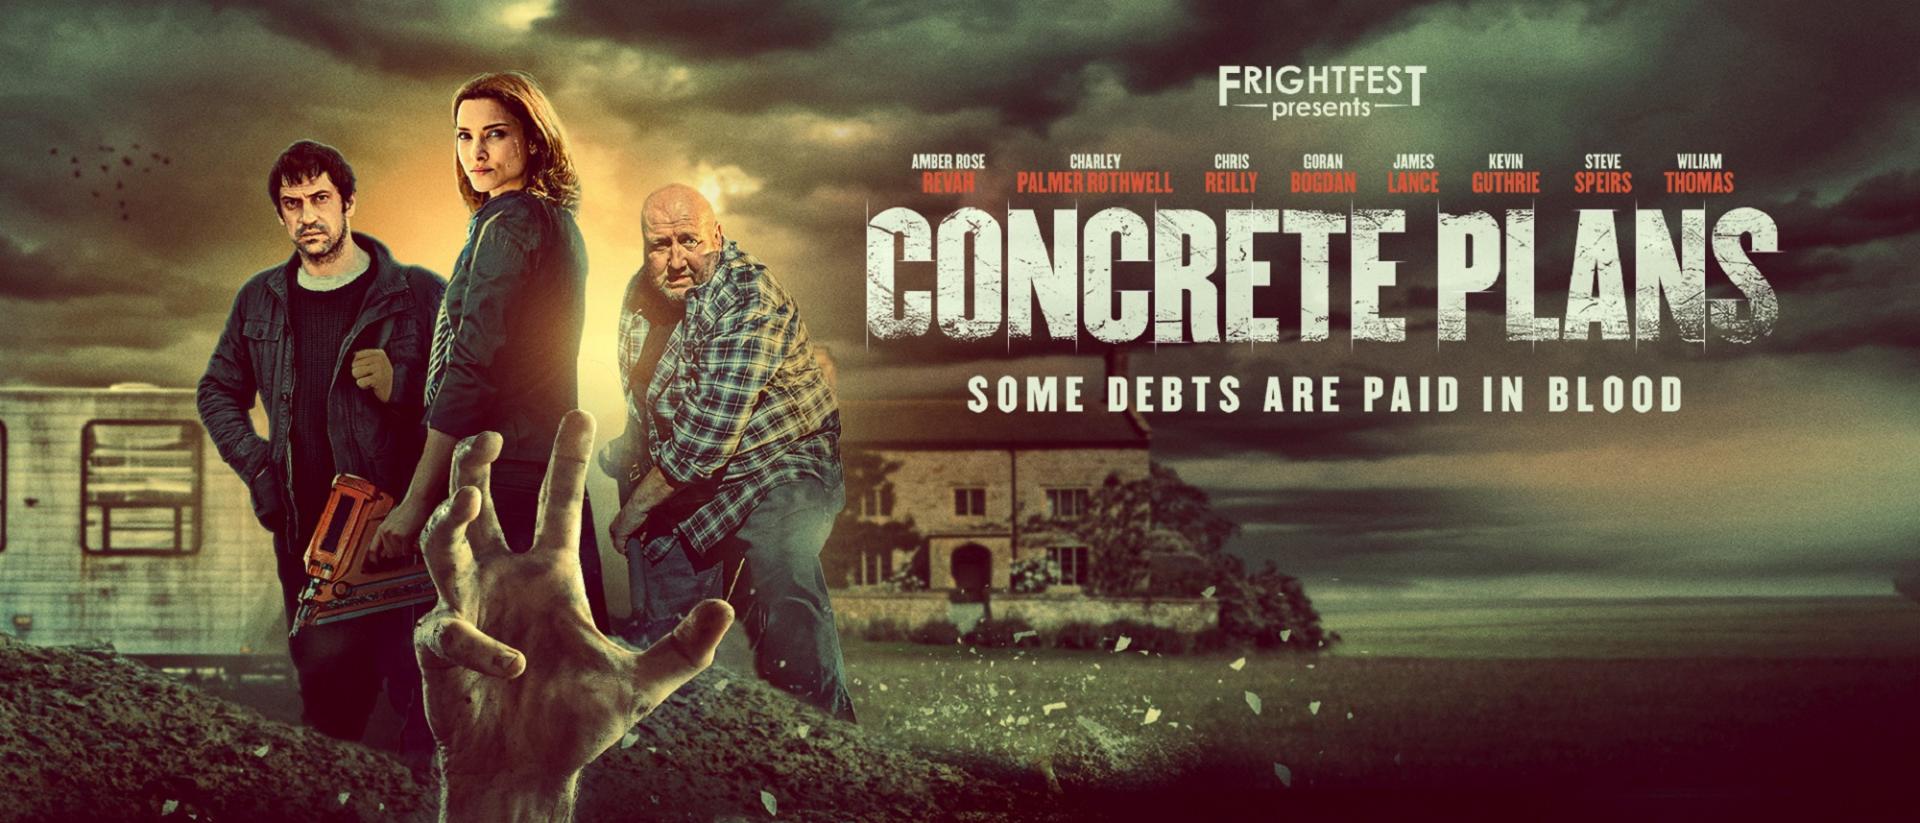 poster for concrete plans featuring a hand rising from a grave